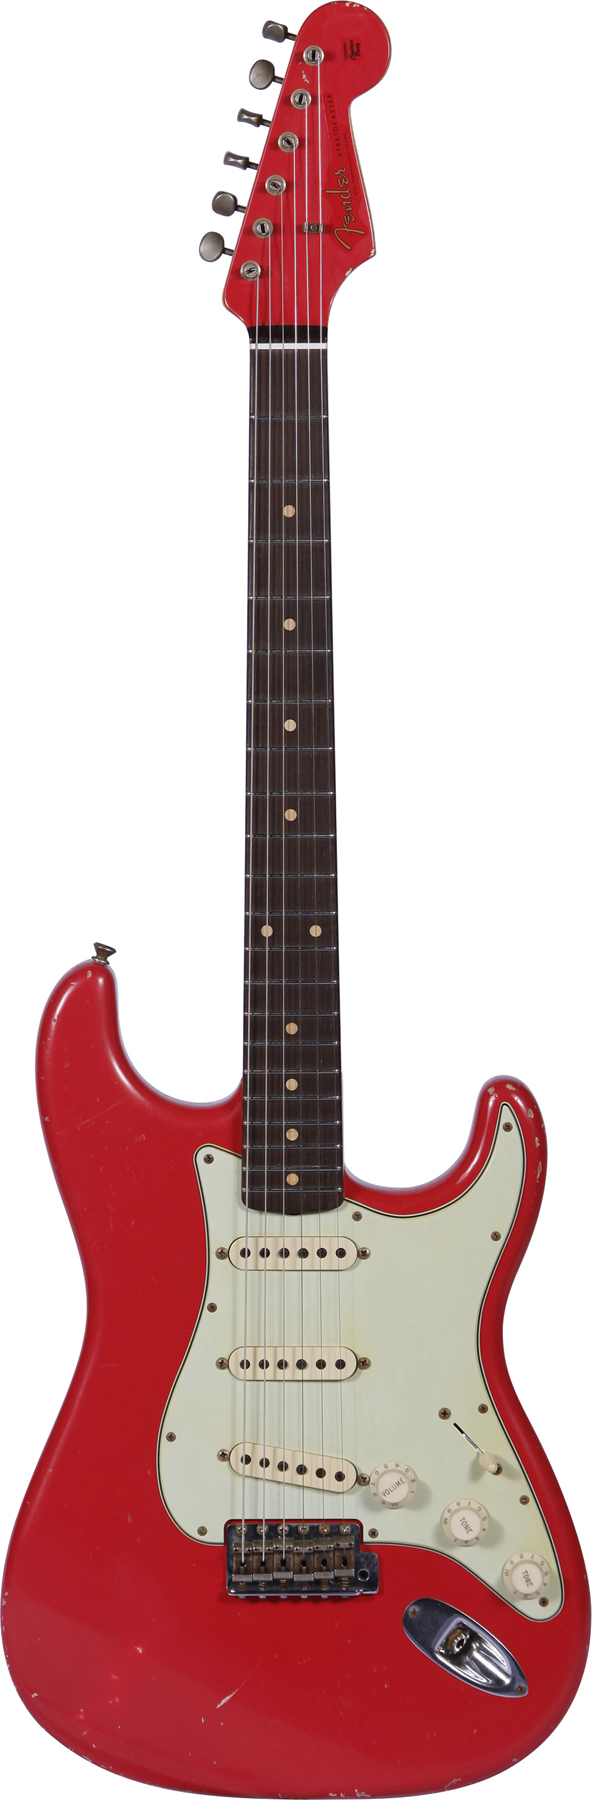 1960 Relic Stratocaster With Matching Headstock